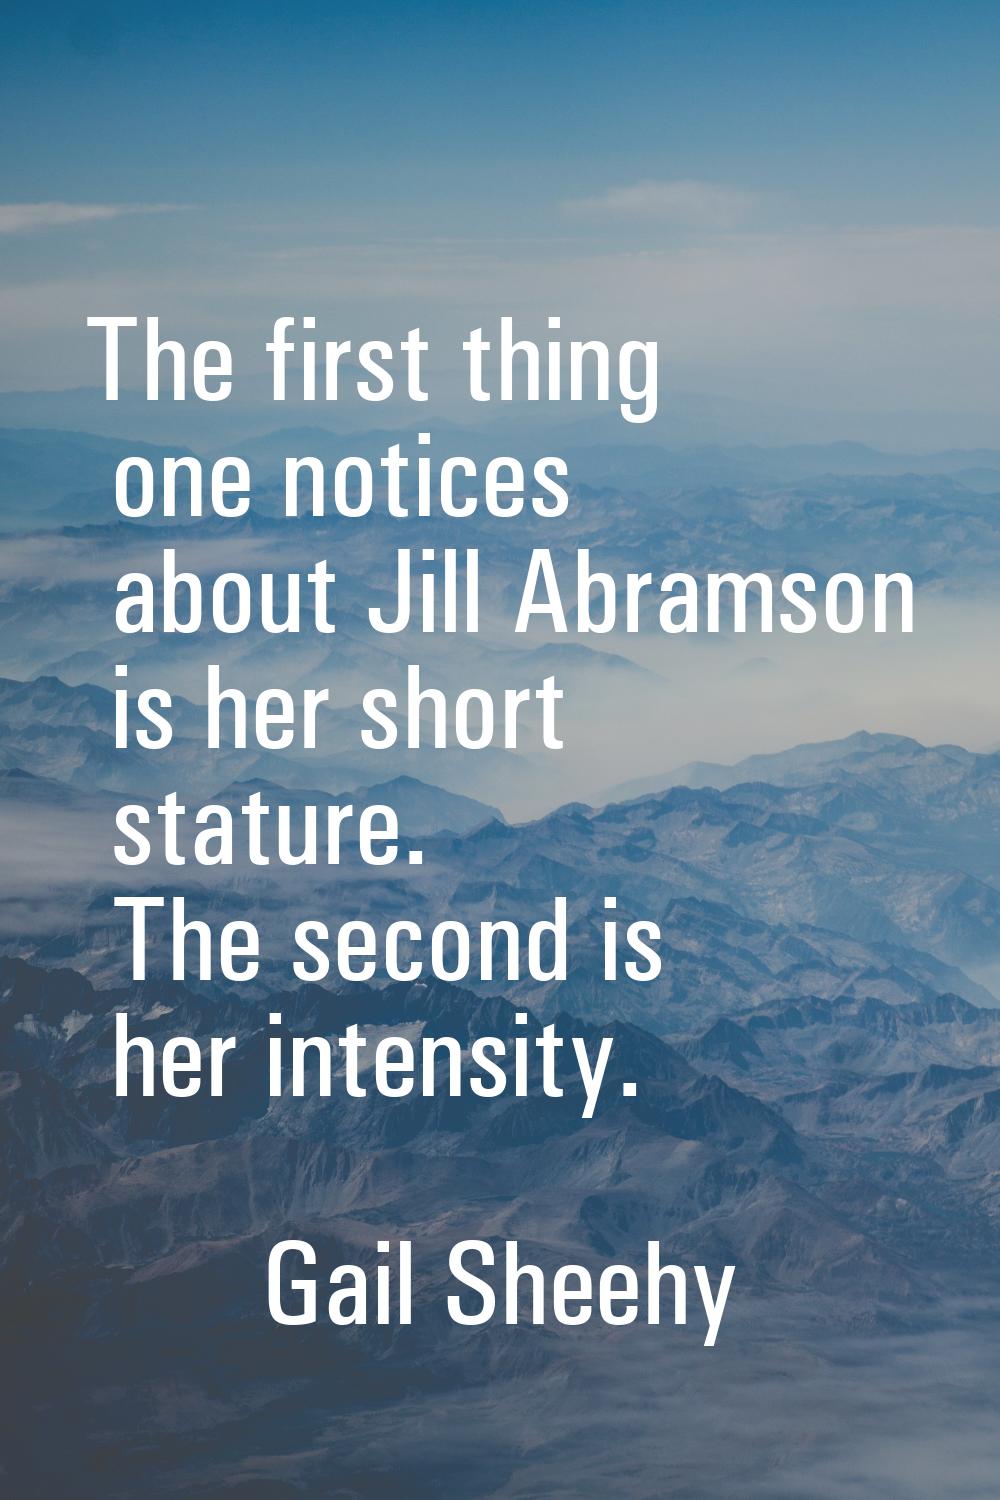 The first thing one notices about Jill Abramson is her short stature. The second is her intensity.